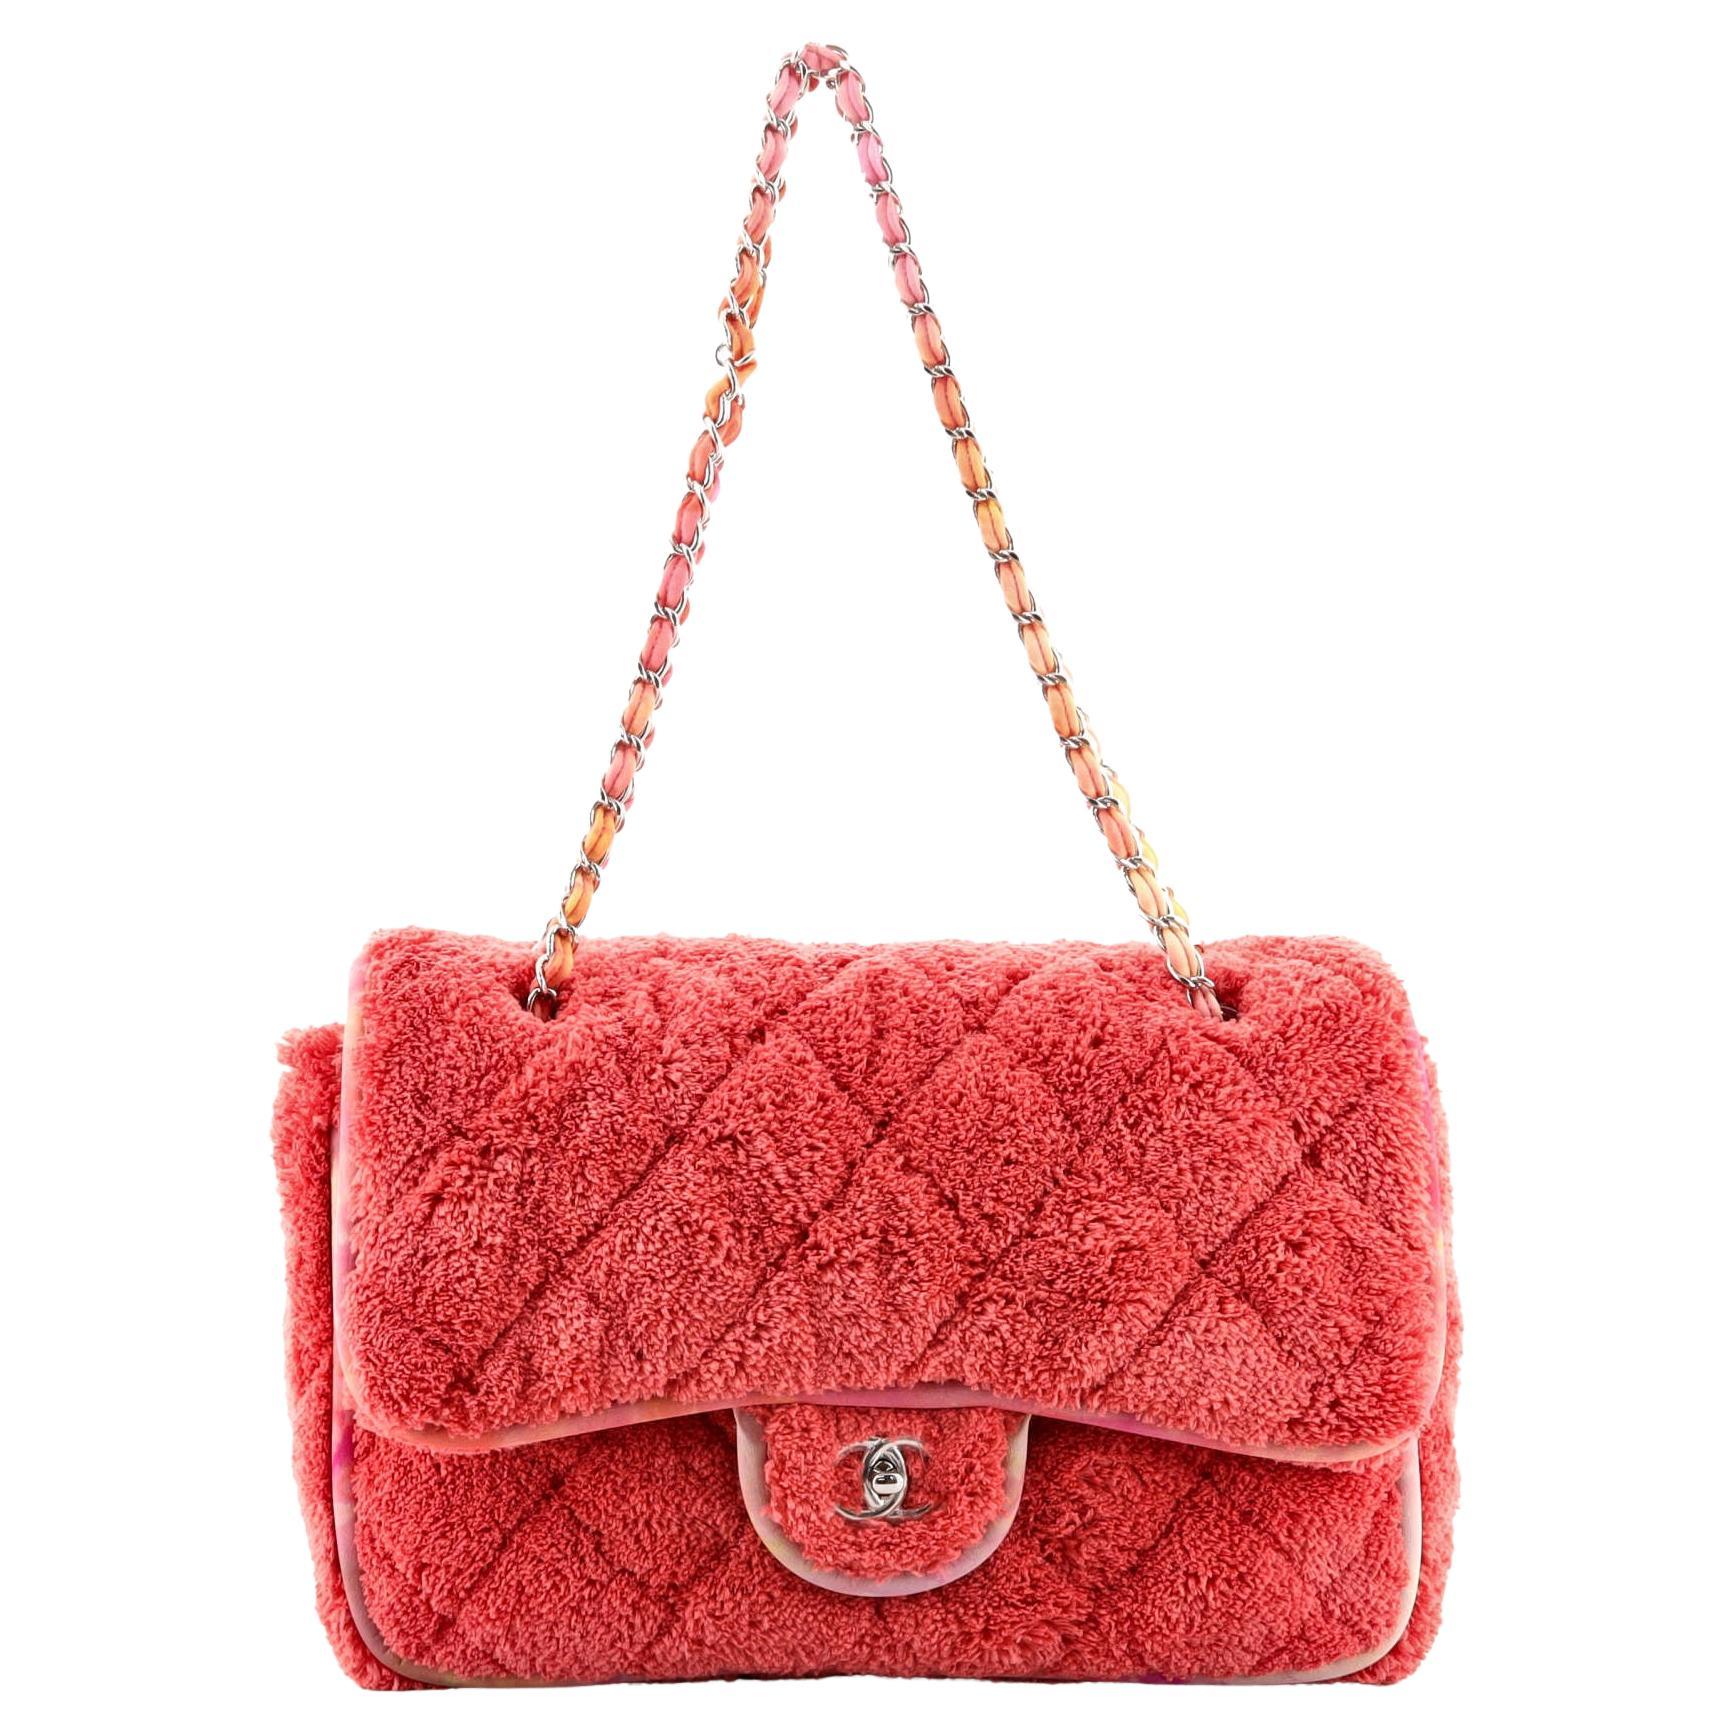 Chanel Classic Single Flap Bag Quilted Terry Cloth and Ribbon Jumbo